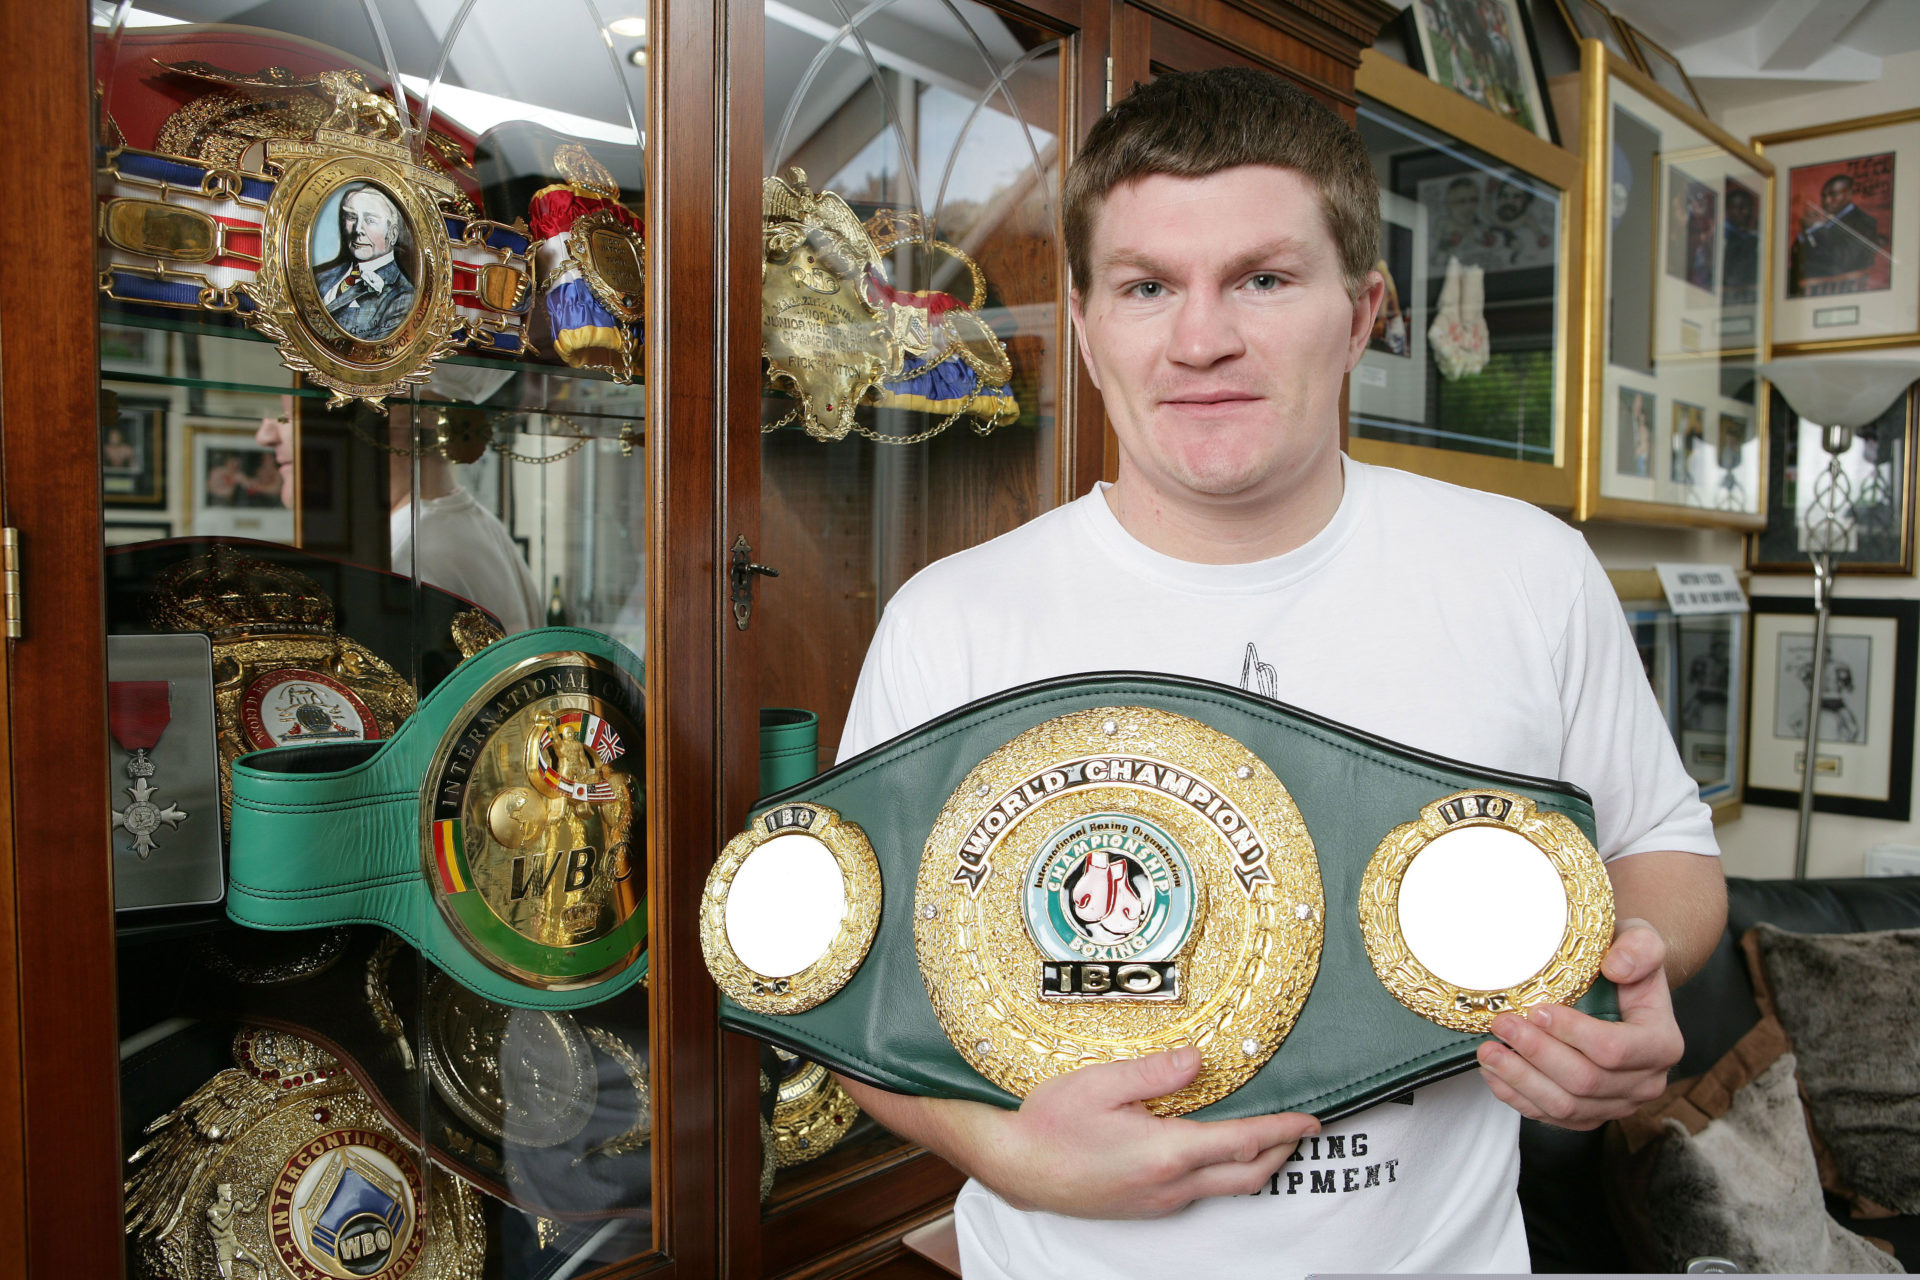 Ricky Hatton at home with his IBO World Championship belt in August 2007. 